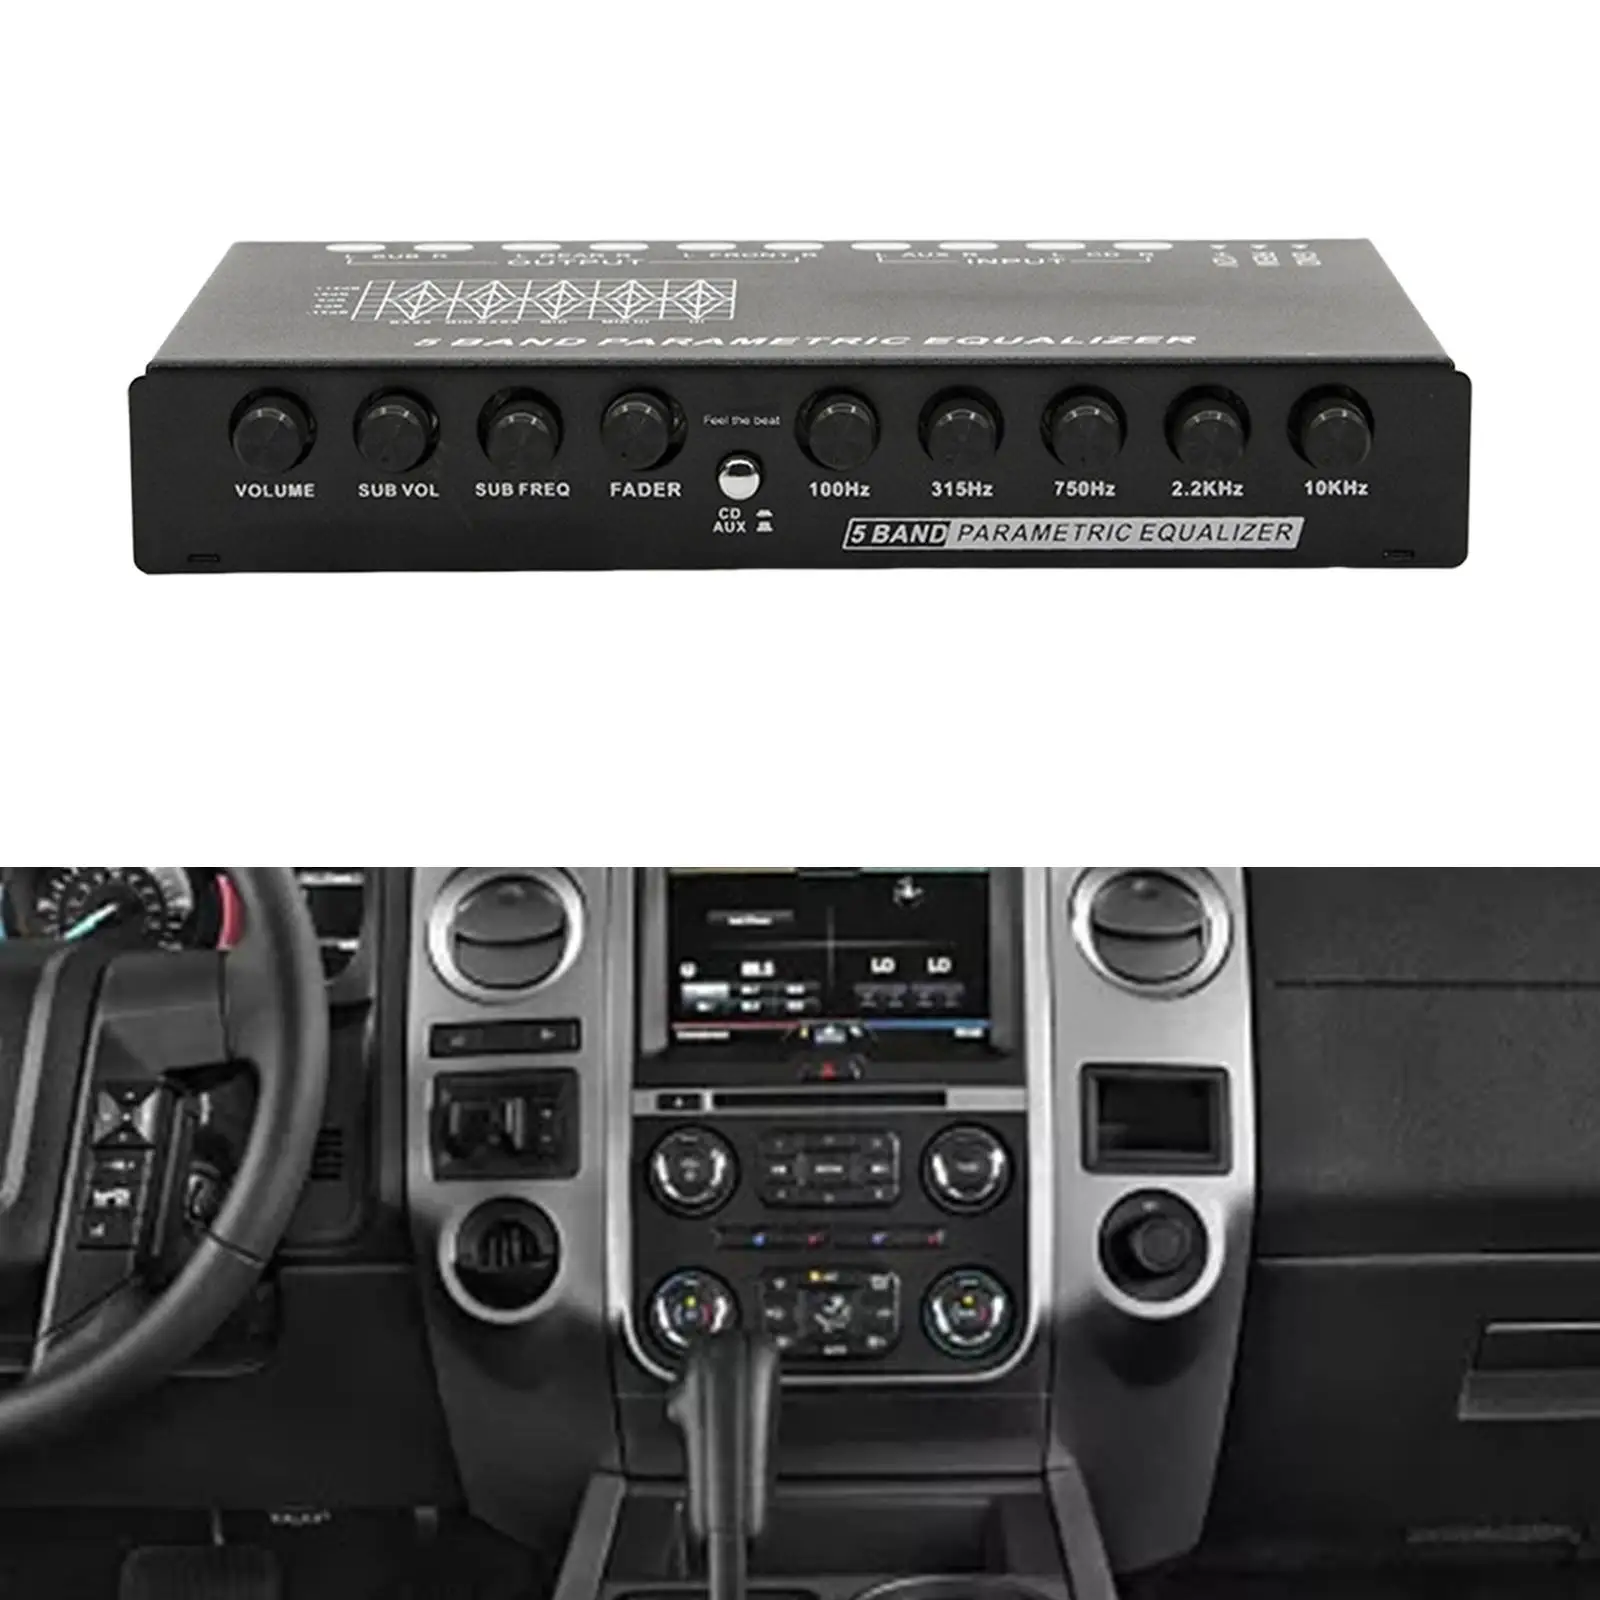 5 Band Car Audio Equalizer Durable High Performance with CD/AUX Input Select Switch for Car Stereo Tone Control Motorcycle Boat